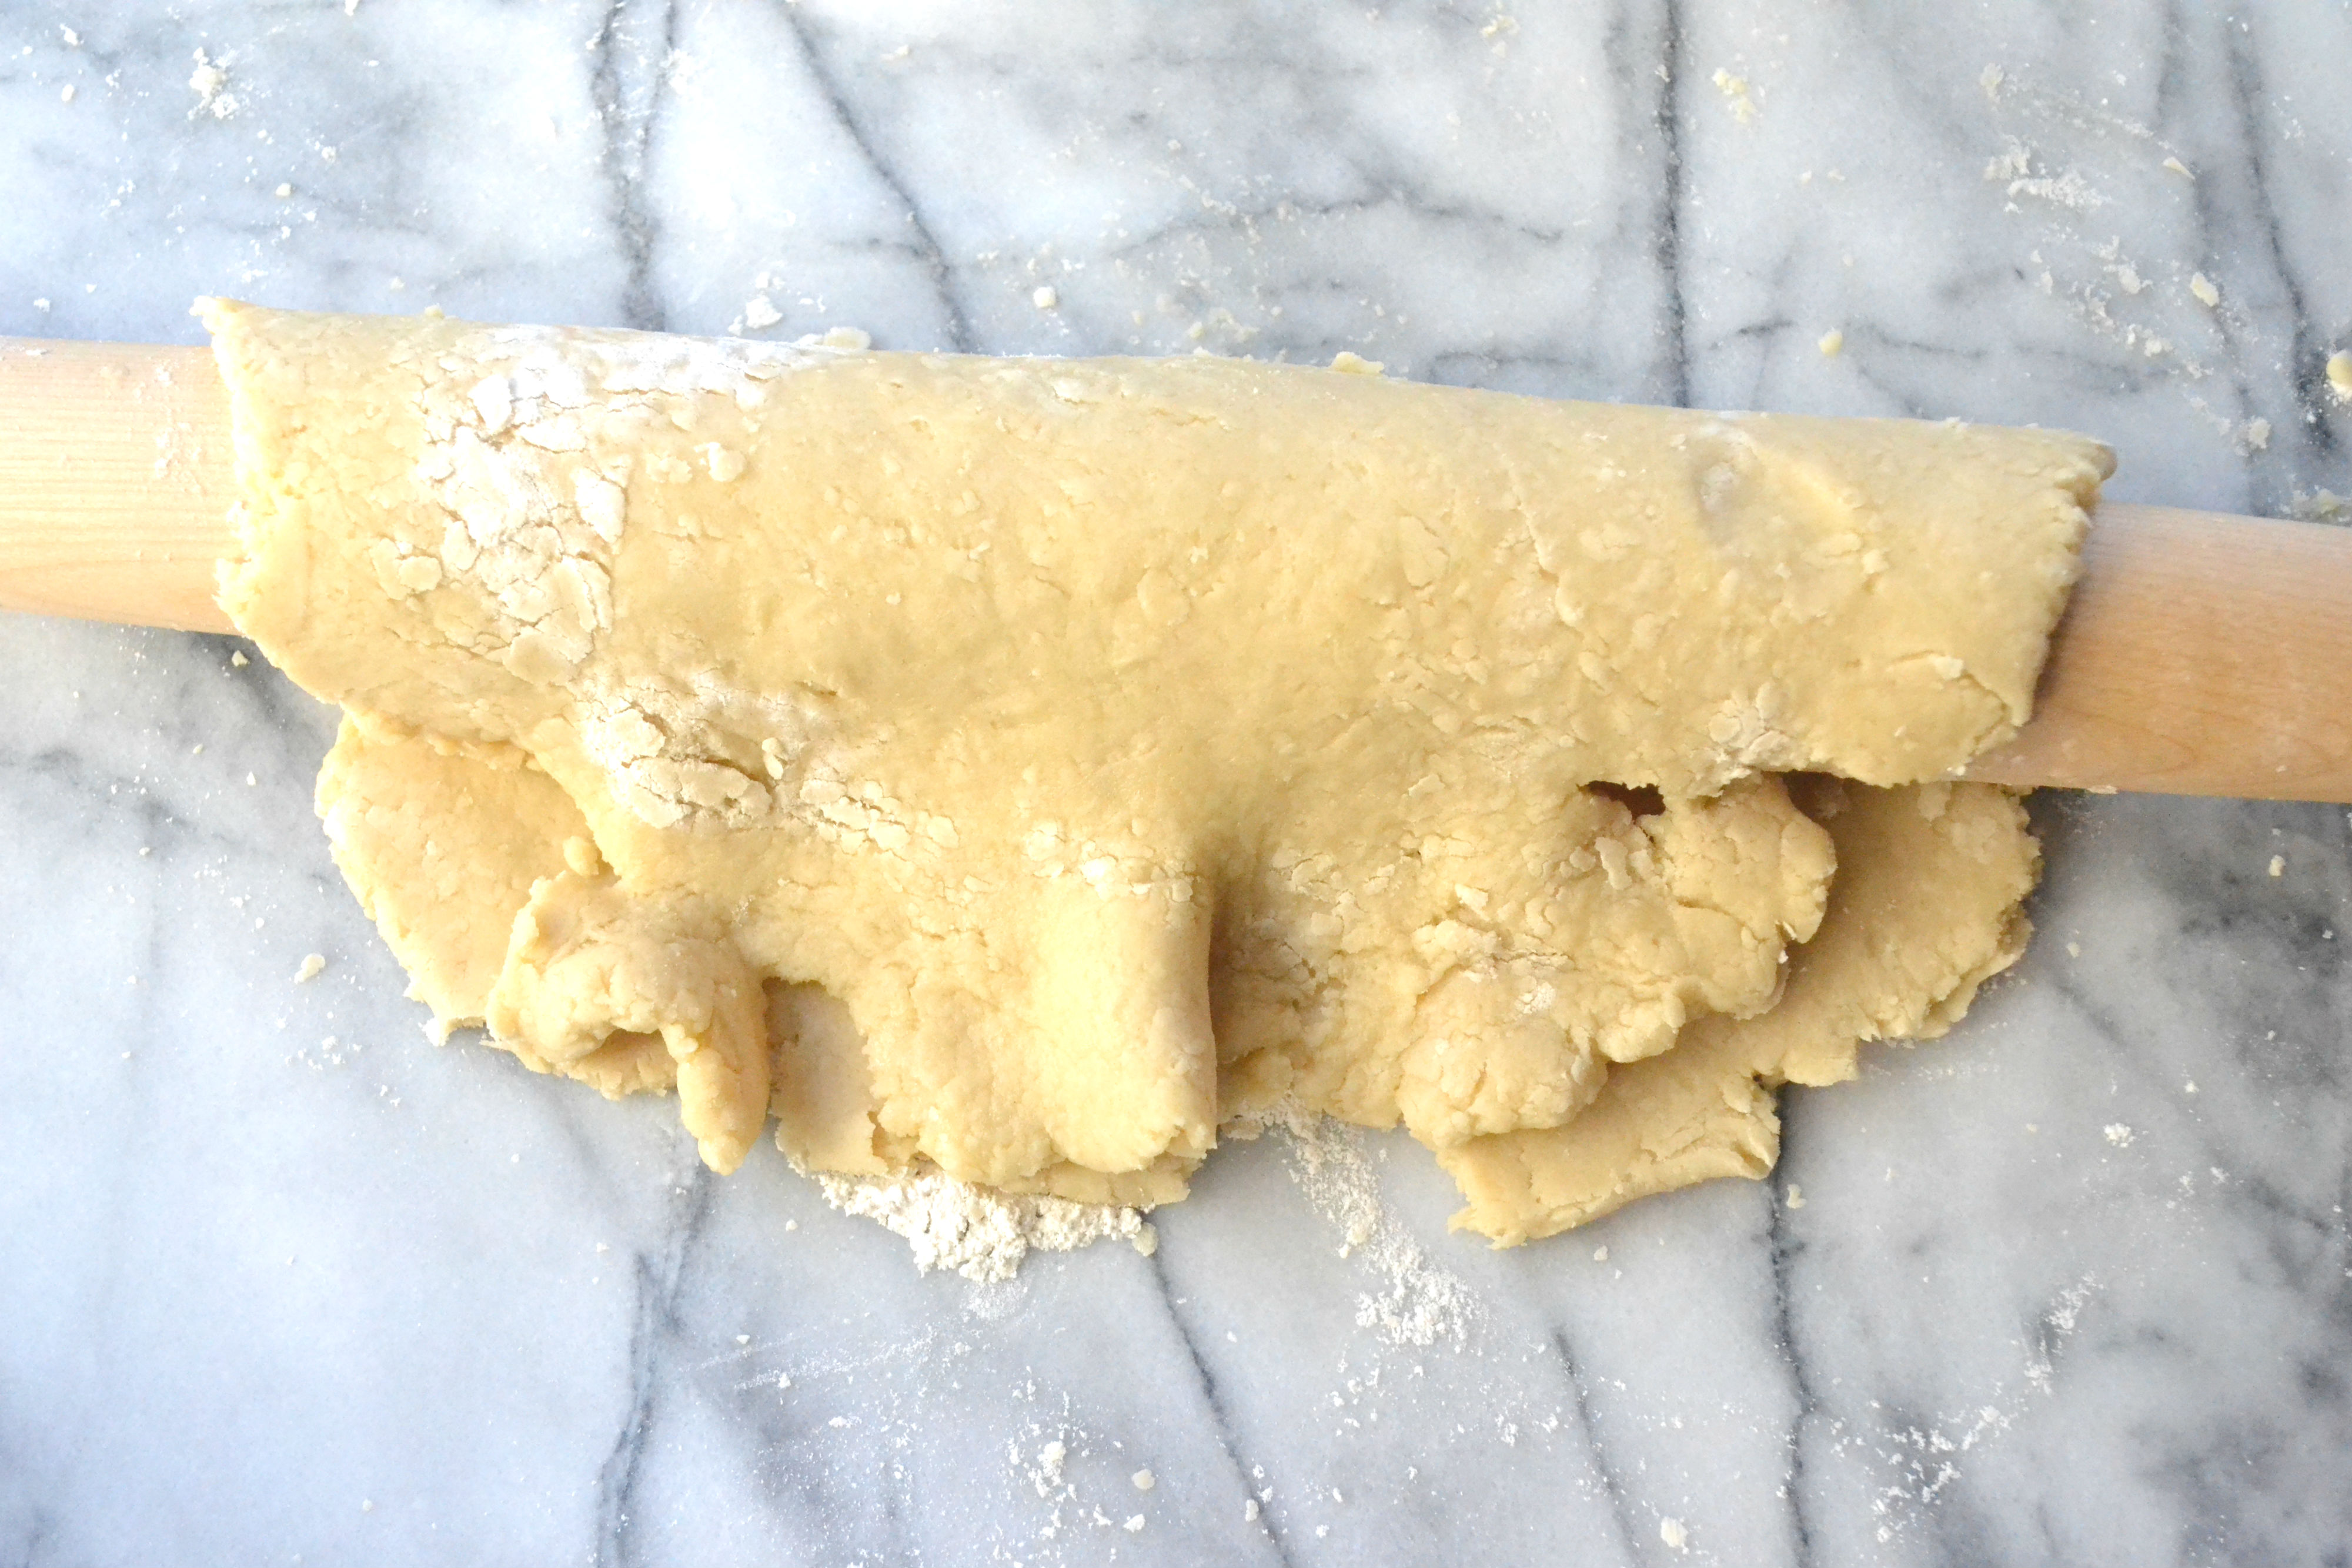 Place the rolling pin in the center of the dough circle. Then carefully lift half of the dough and place on top of the rolling pin, like you're folding the dough in half. 